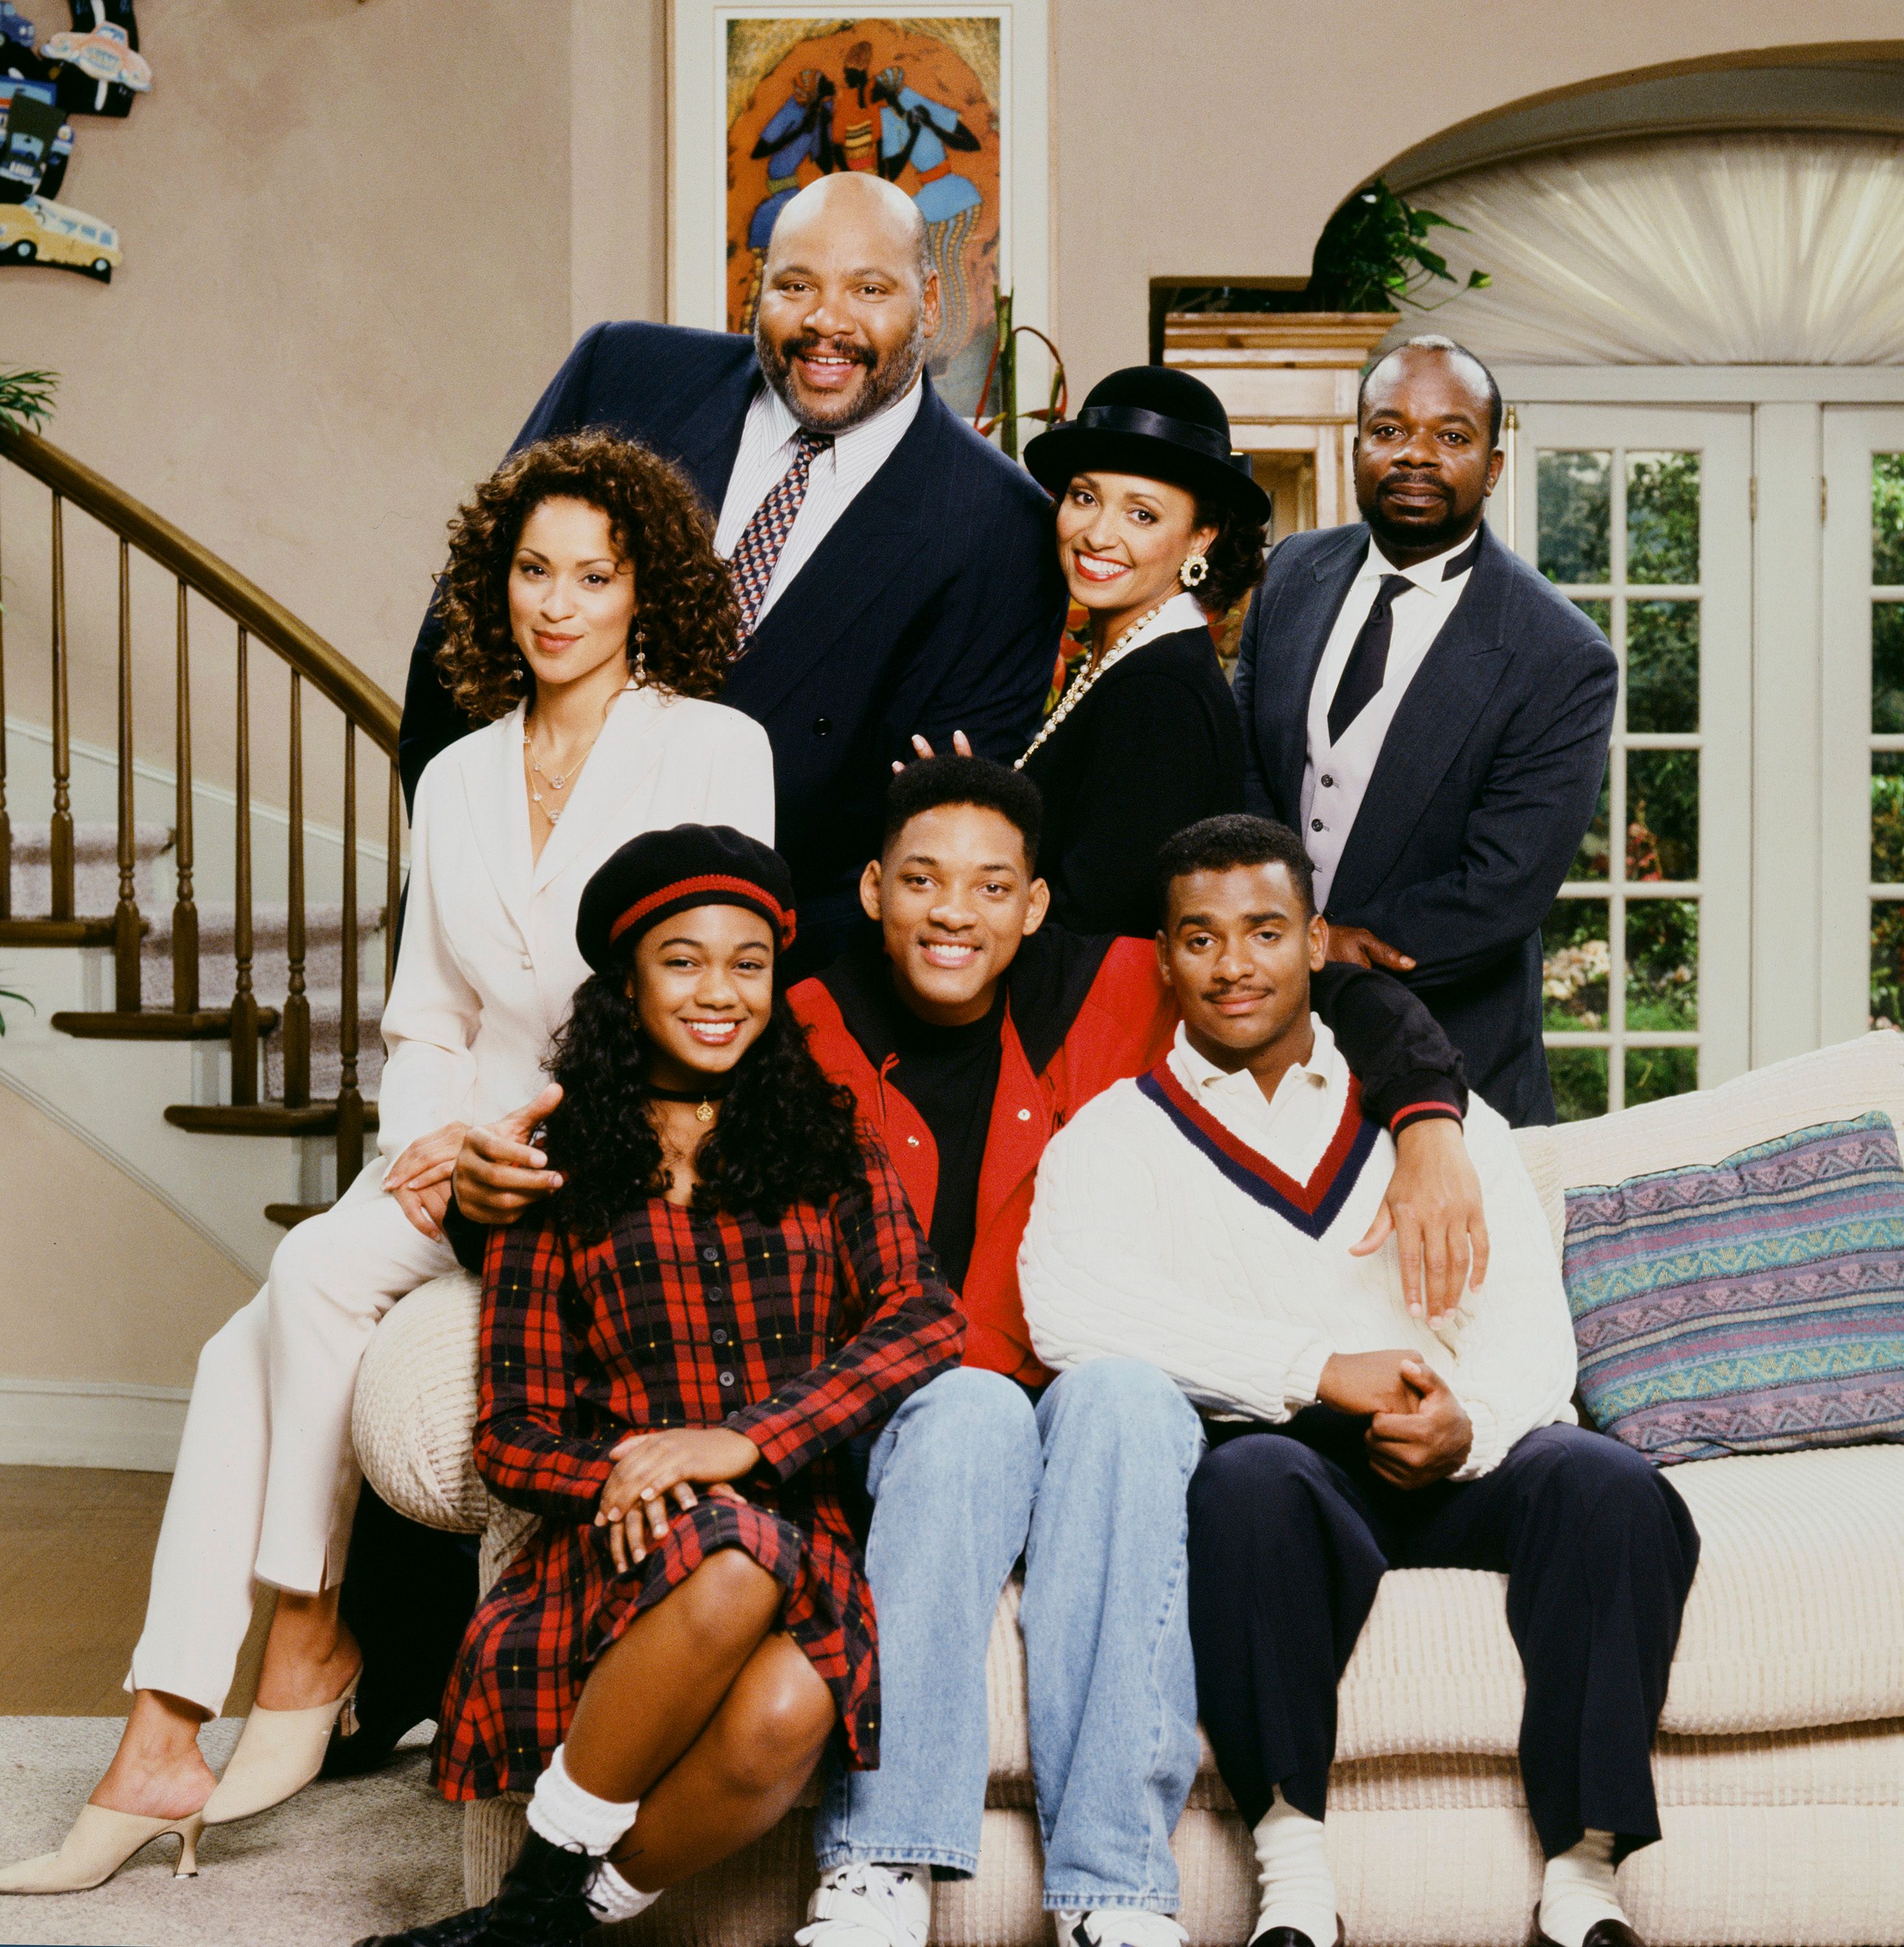 "The Fresh Prince of Bel-Air" cast: Karyn Parsons as Hilary Banks, James Avery as Philip Banks, Daphne Reid as Vivian Banks, Joseph Marcell as Geoffrey; Front: Tatyana Ali as Ashley Banks, Will Smith as William 'Will' Smith, Alfonso Ribeiro as Carlton Banks | Source: Getty Images